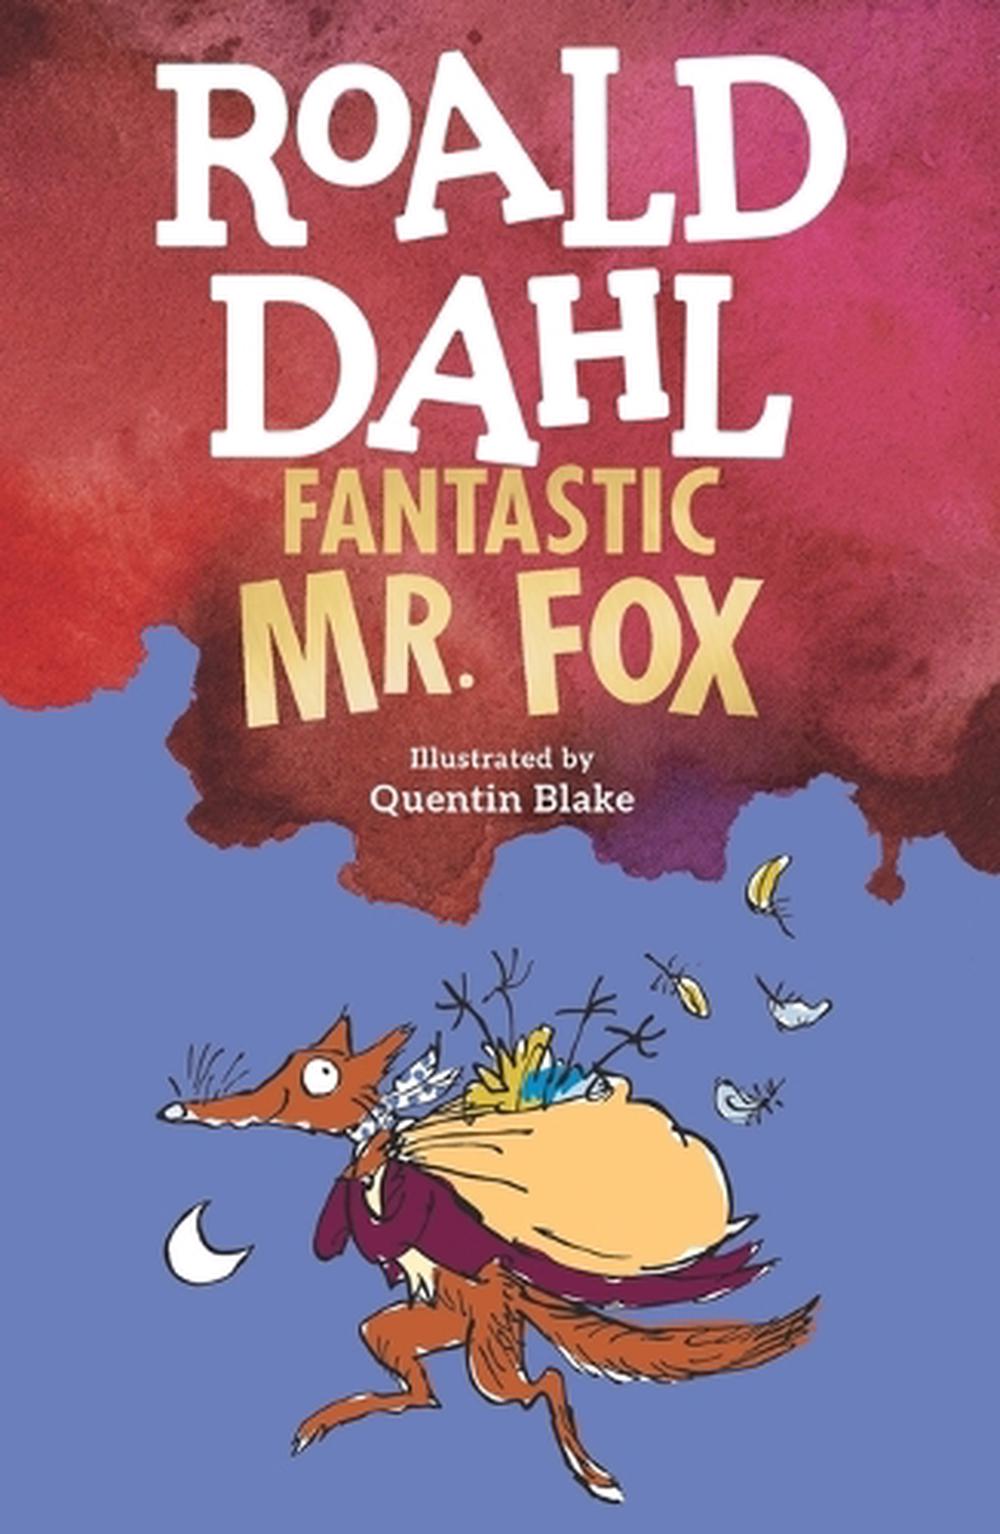 fantastic mr fox book pages